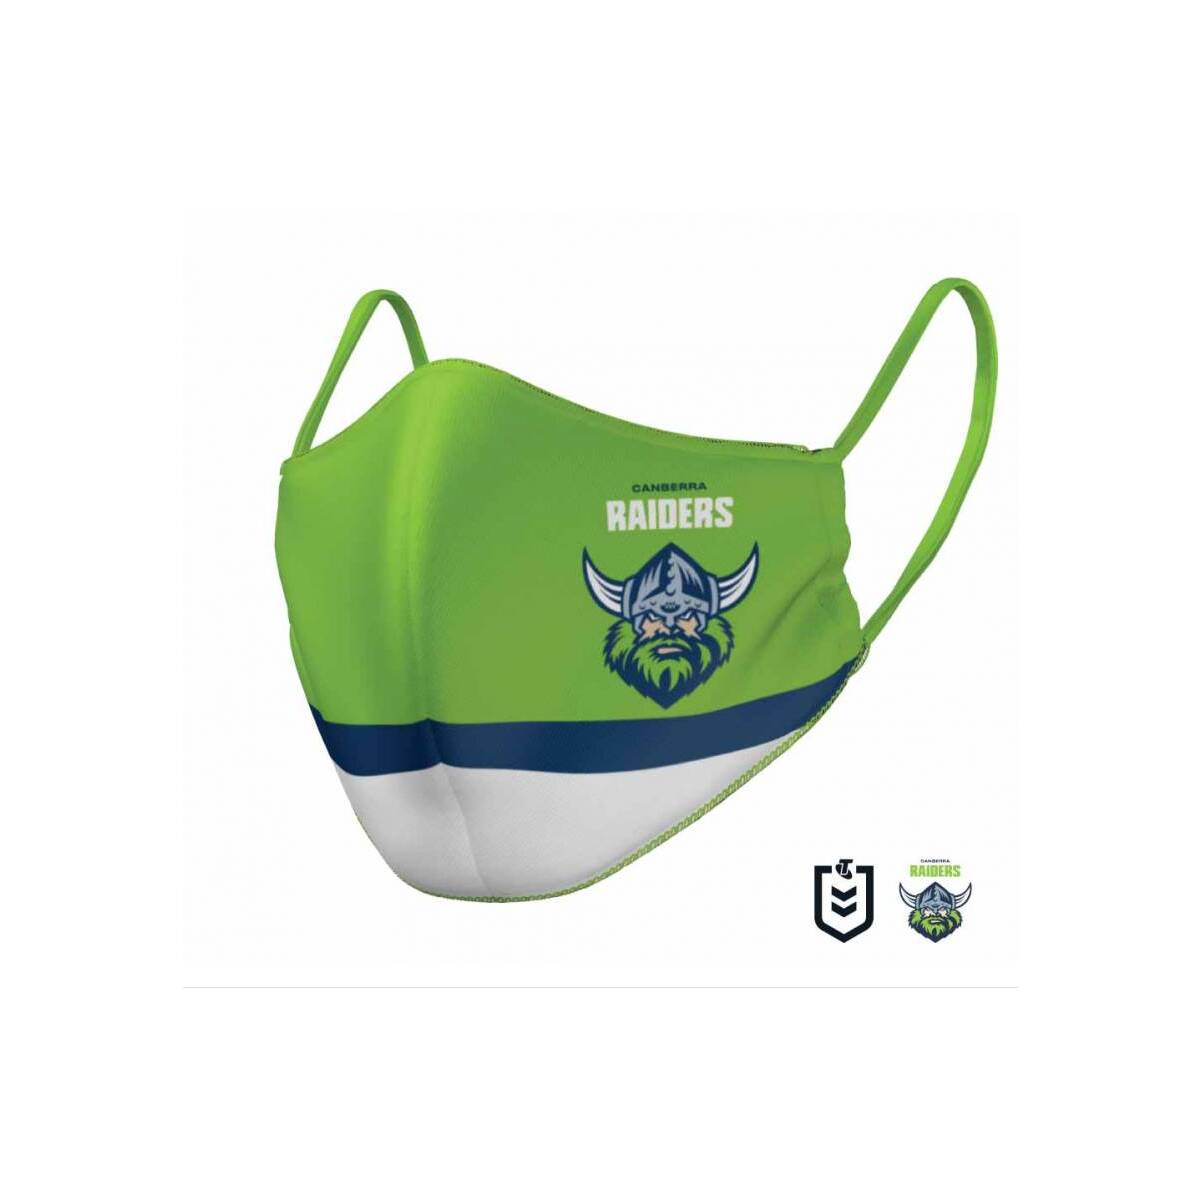 Canberra Raiders Face Mask Adult Large0